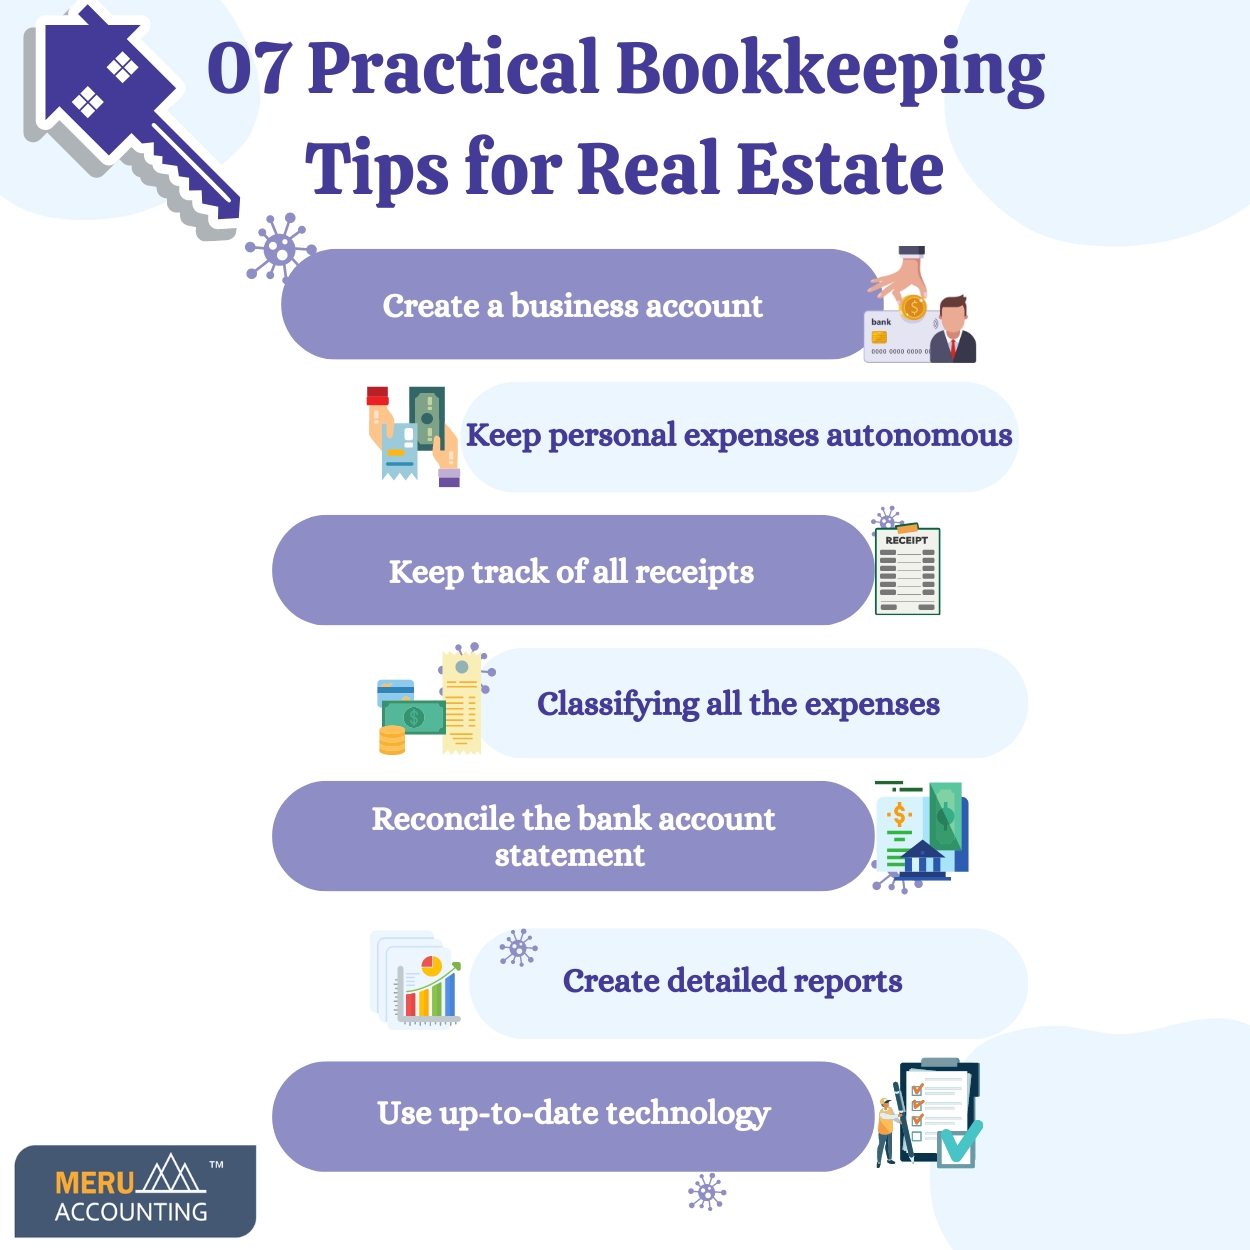 07 Practical Bookkeeping Tips for Real Estate.1250 by 1250